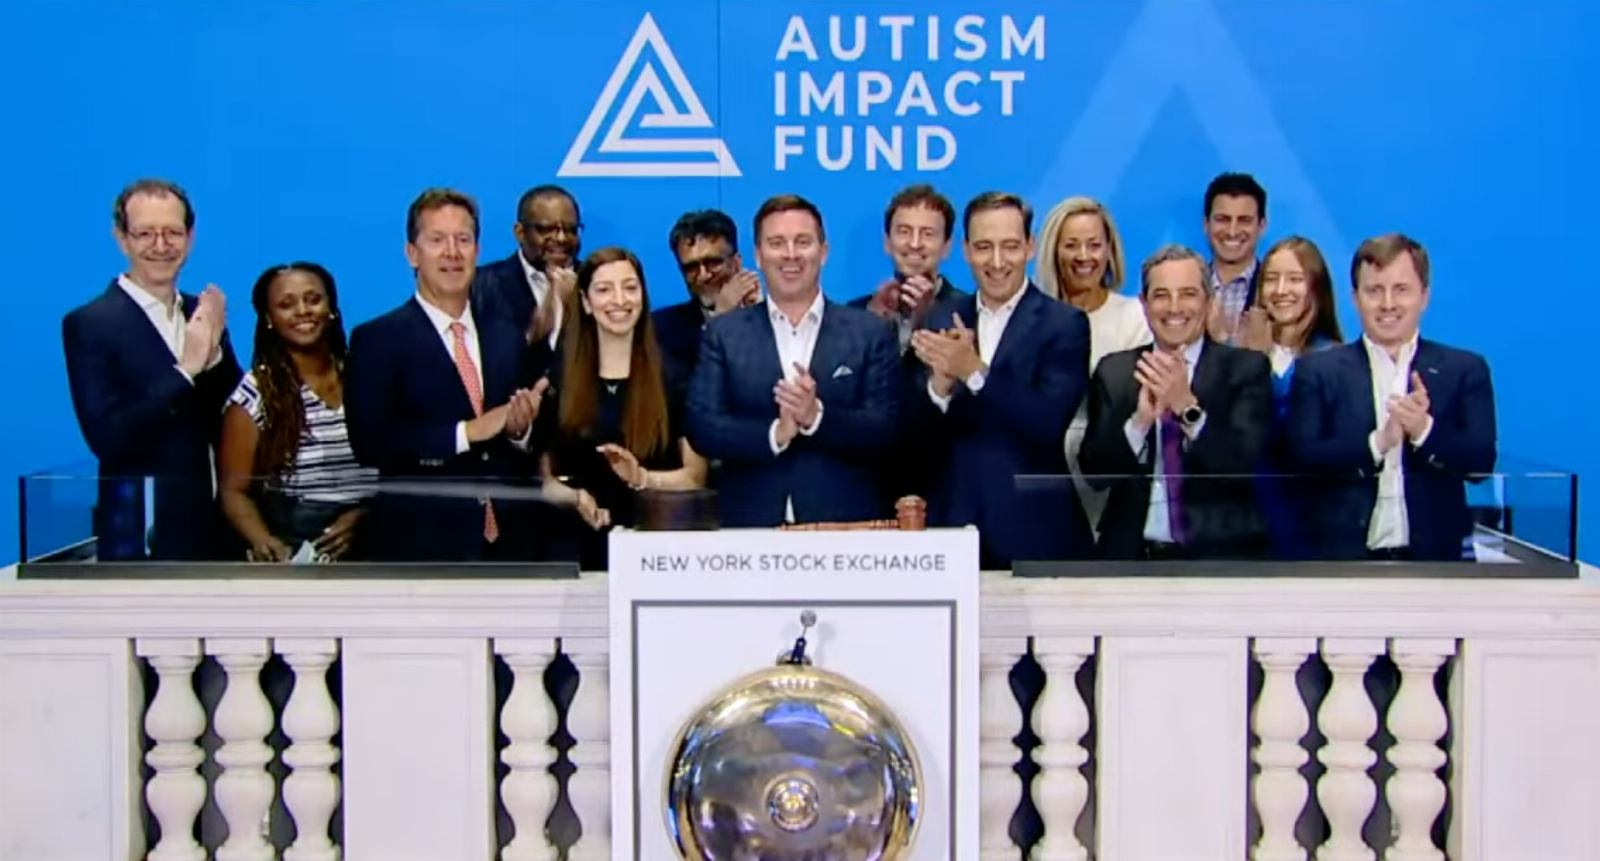 Autism Impact Fund closes $60 million first fund and broadens its scope